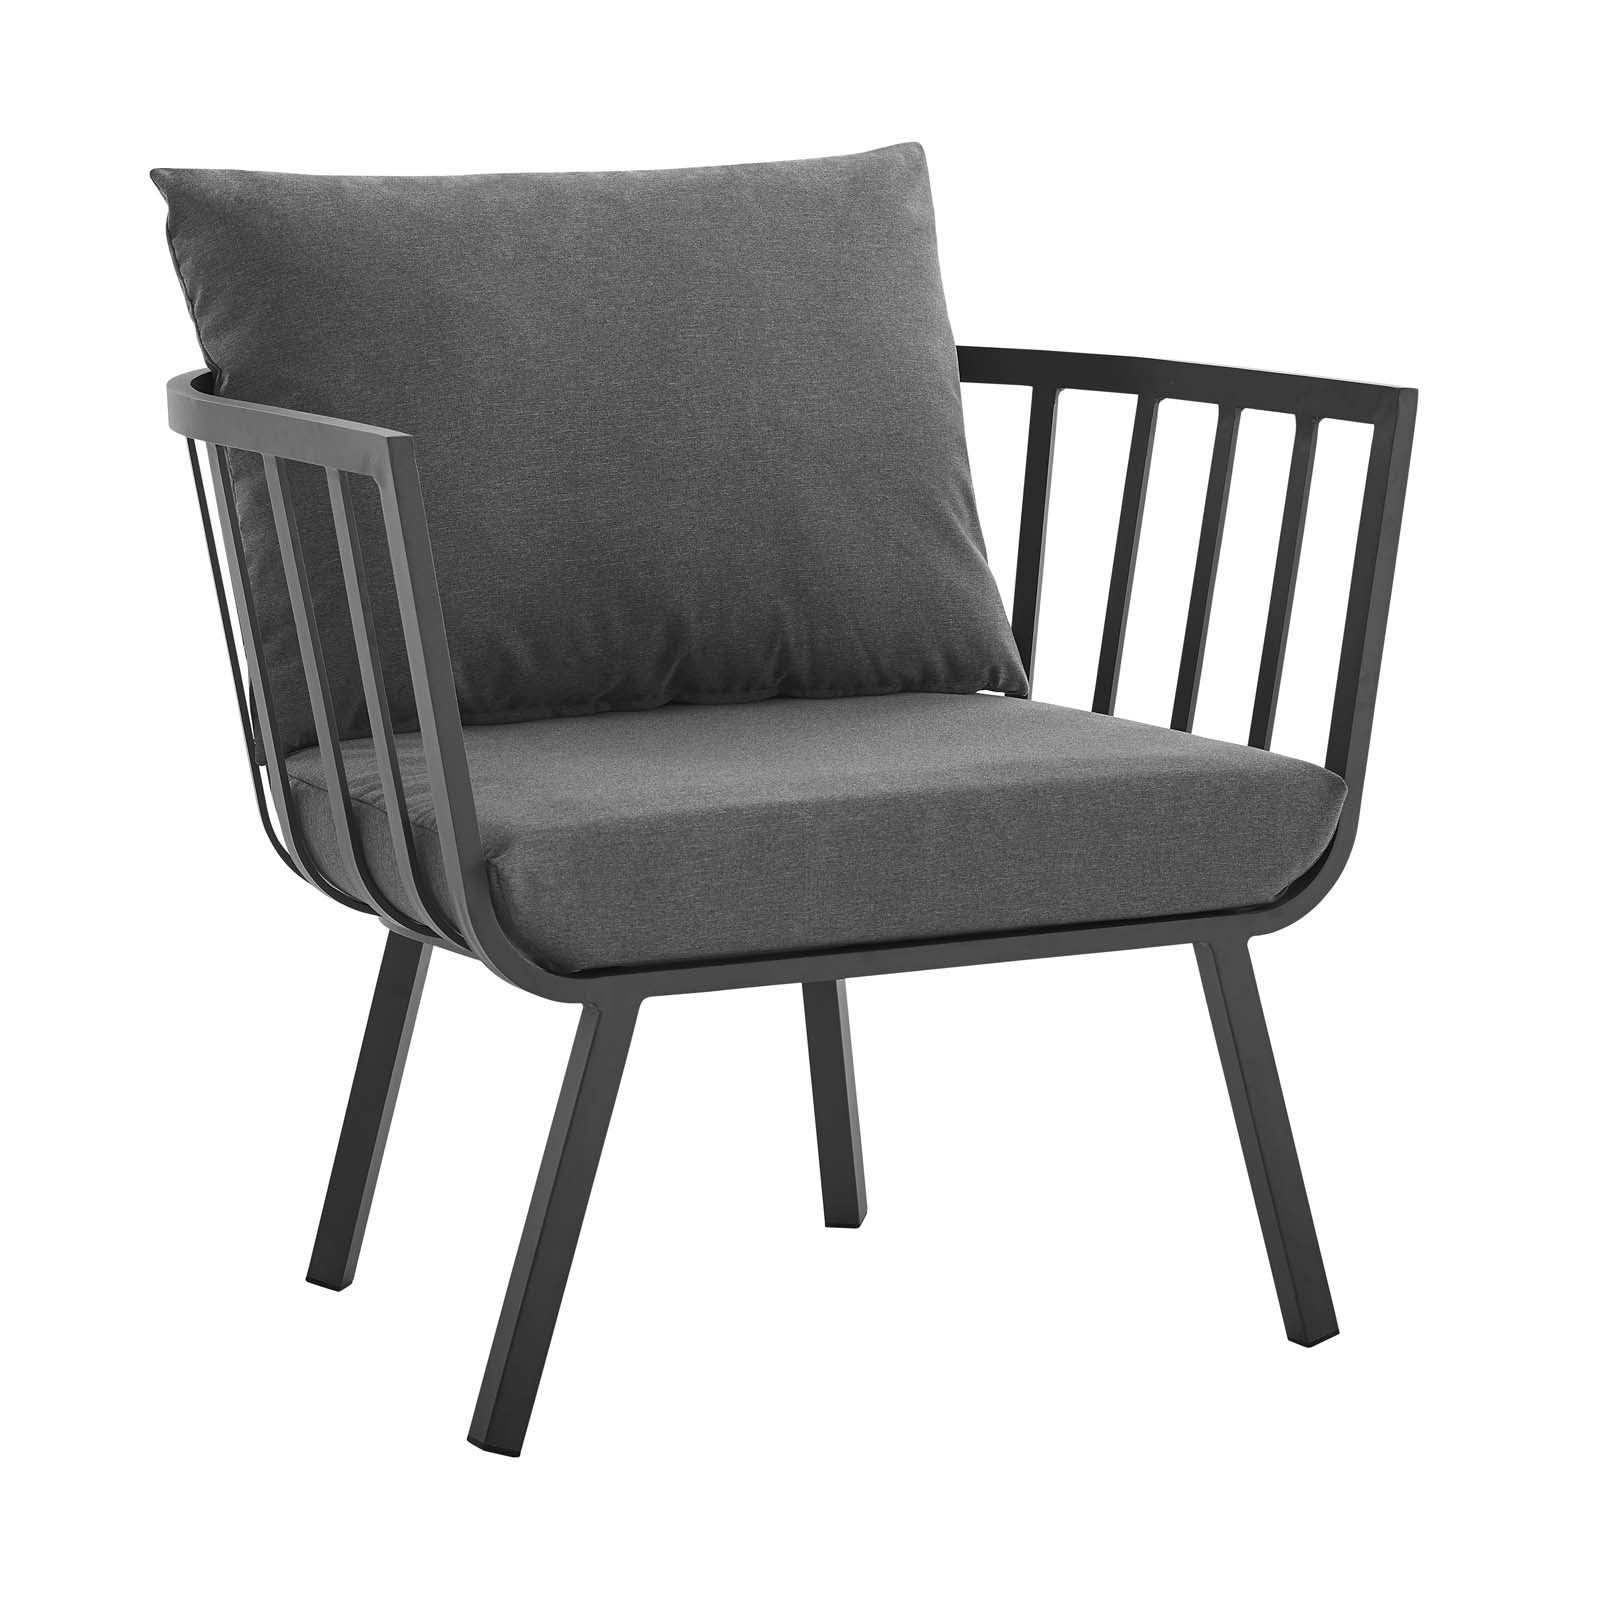 Modway Outdoor Chairs - Riverside Outdoor Patio Aluminum Armchair Gray Charcoal